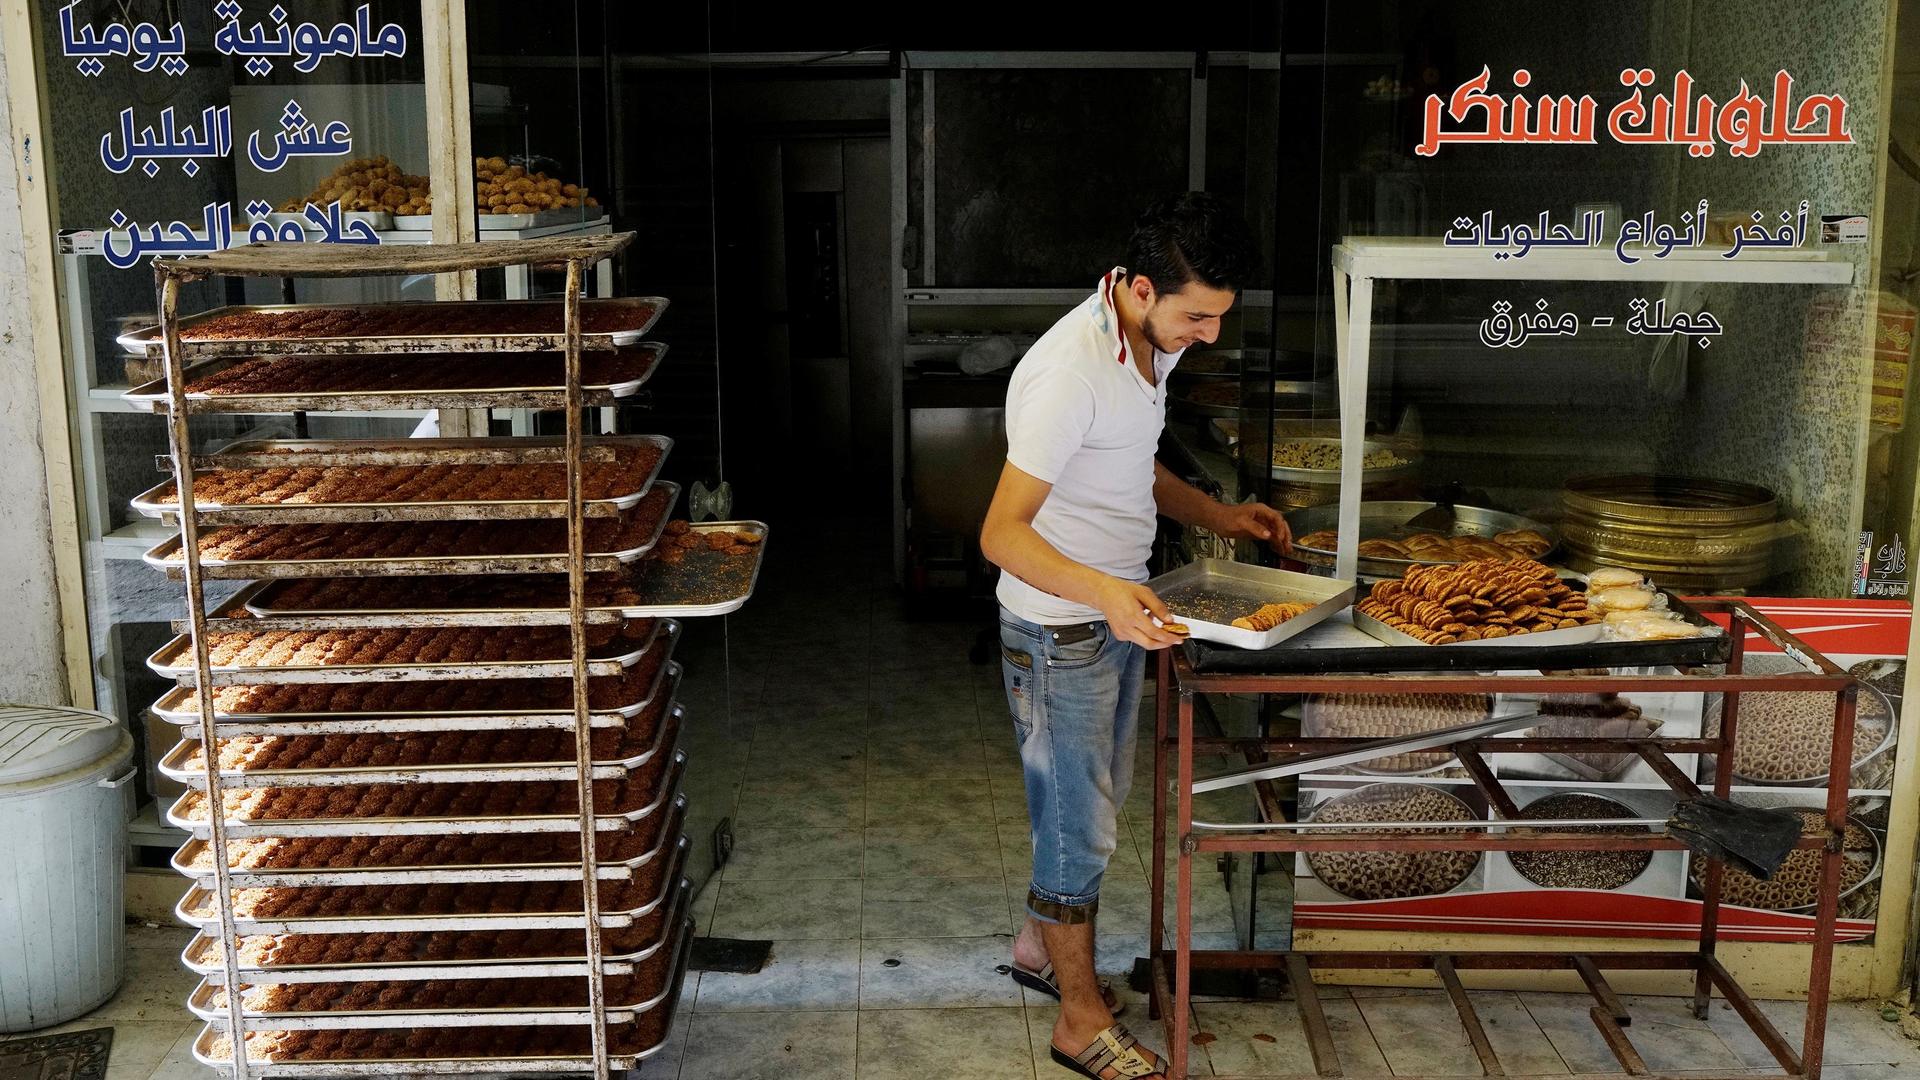 A Syrian refugee man works at a bakery in Gaziantep, Turkey, May 16, 2016. 